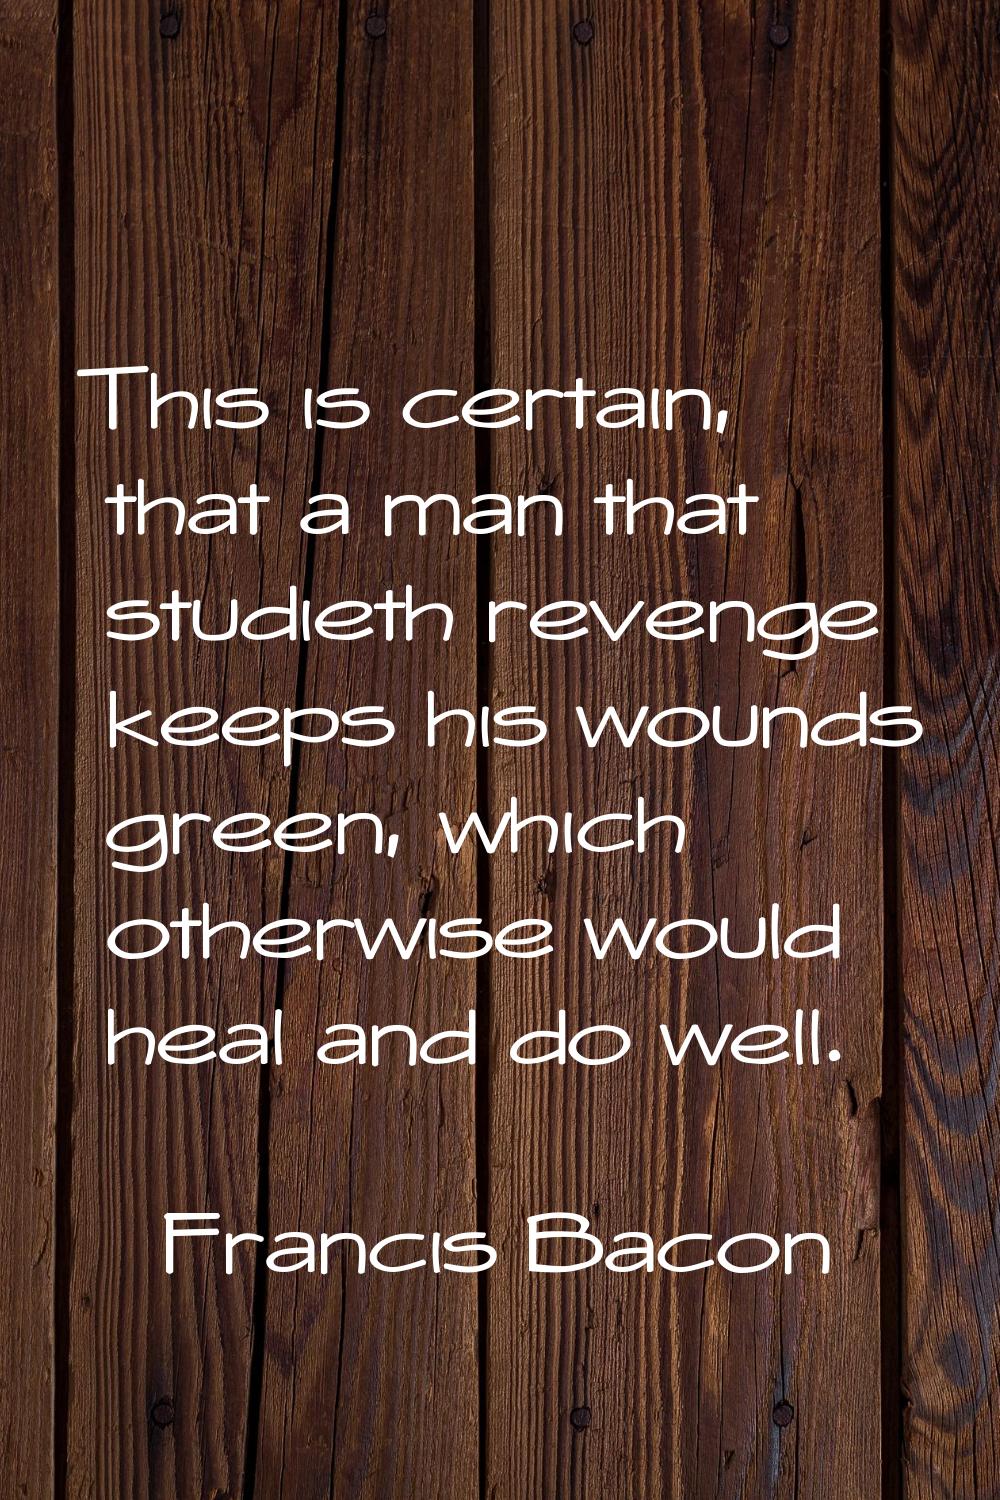 This is certain, that a man that studieth revenge keeps his wounds green, which otherwise would hea